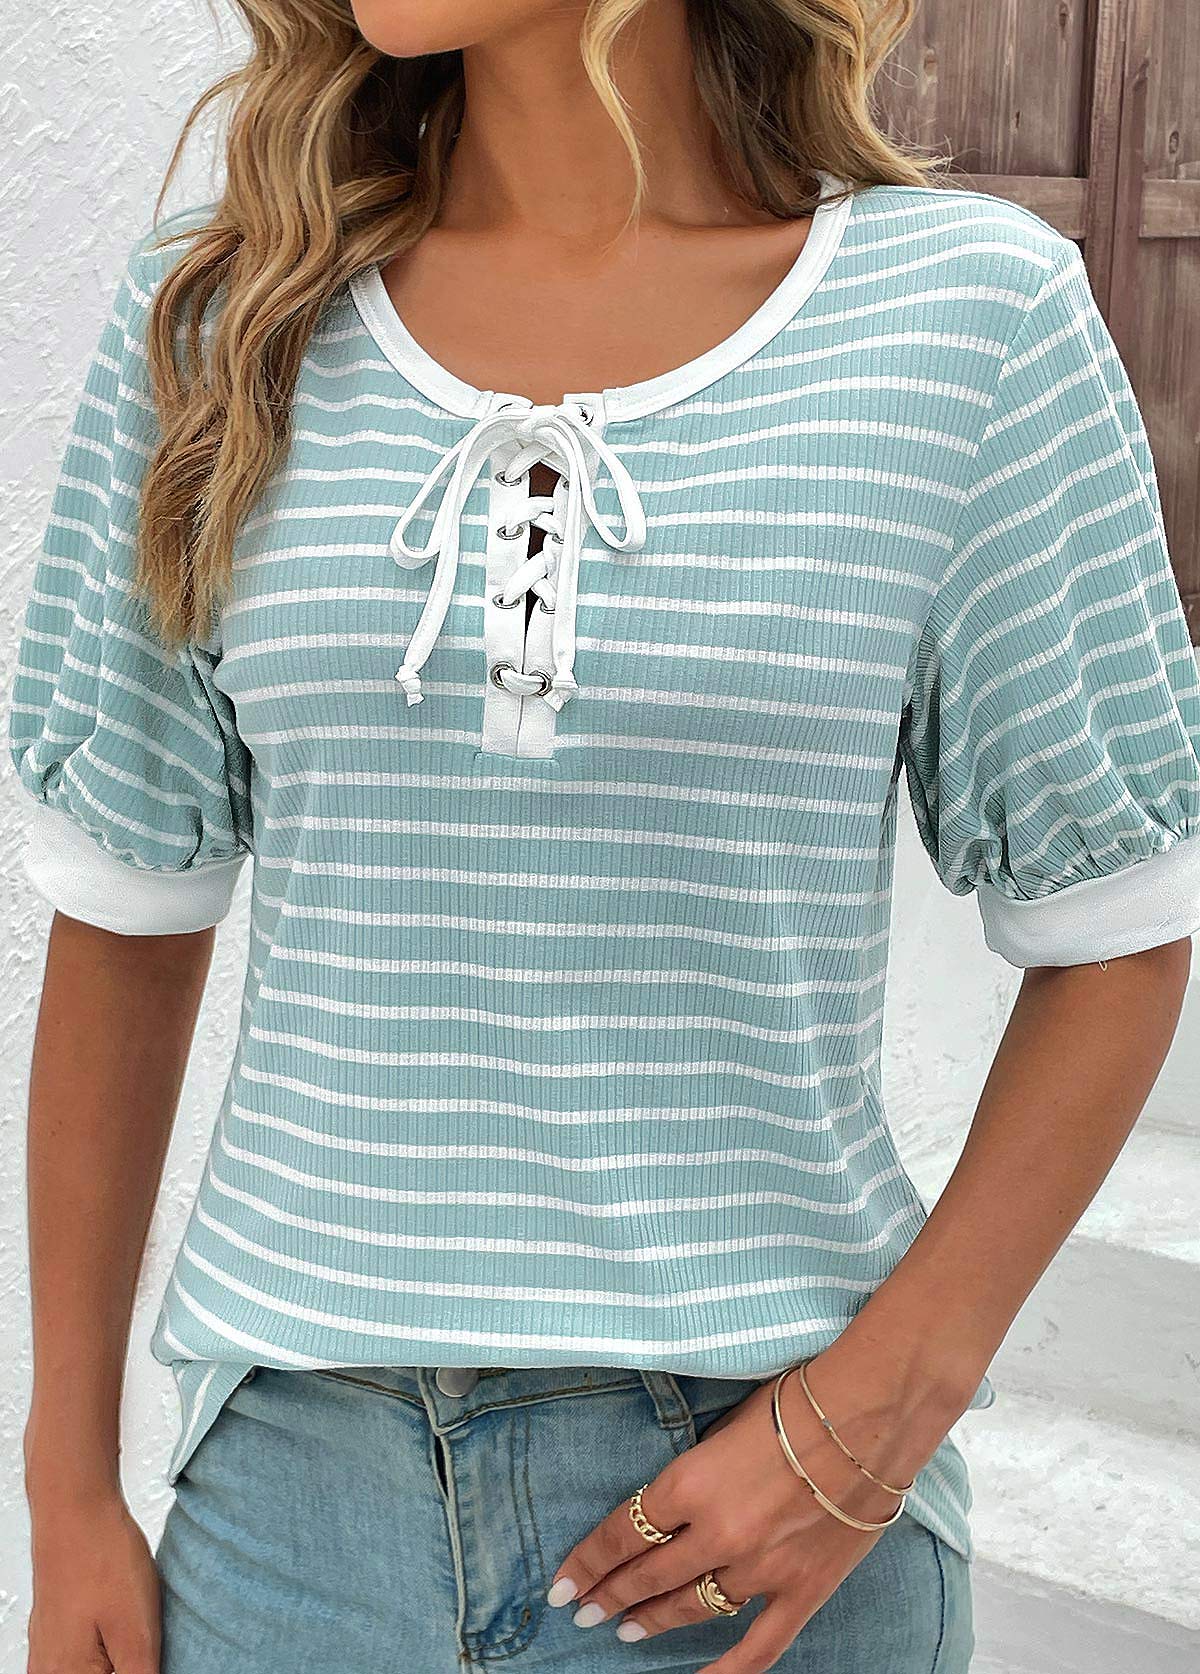 Lace Up Round Neck Mint Green T Shirt